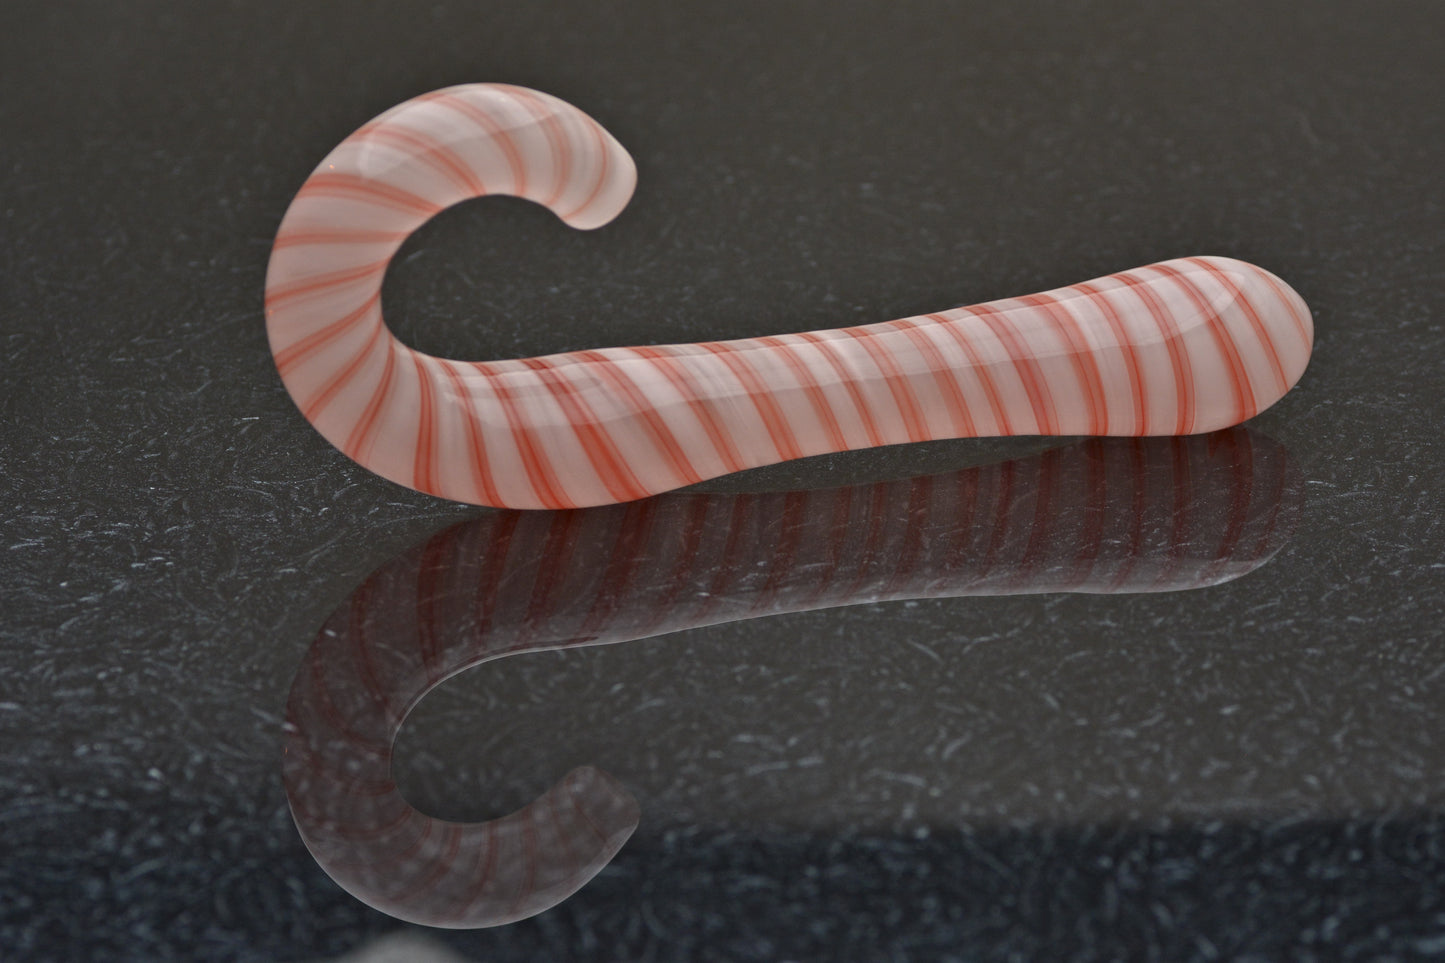 Peppermint Candy Cane